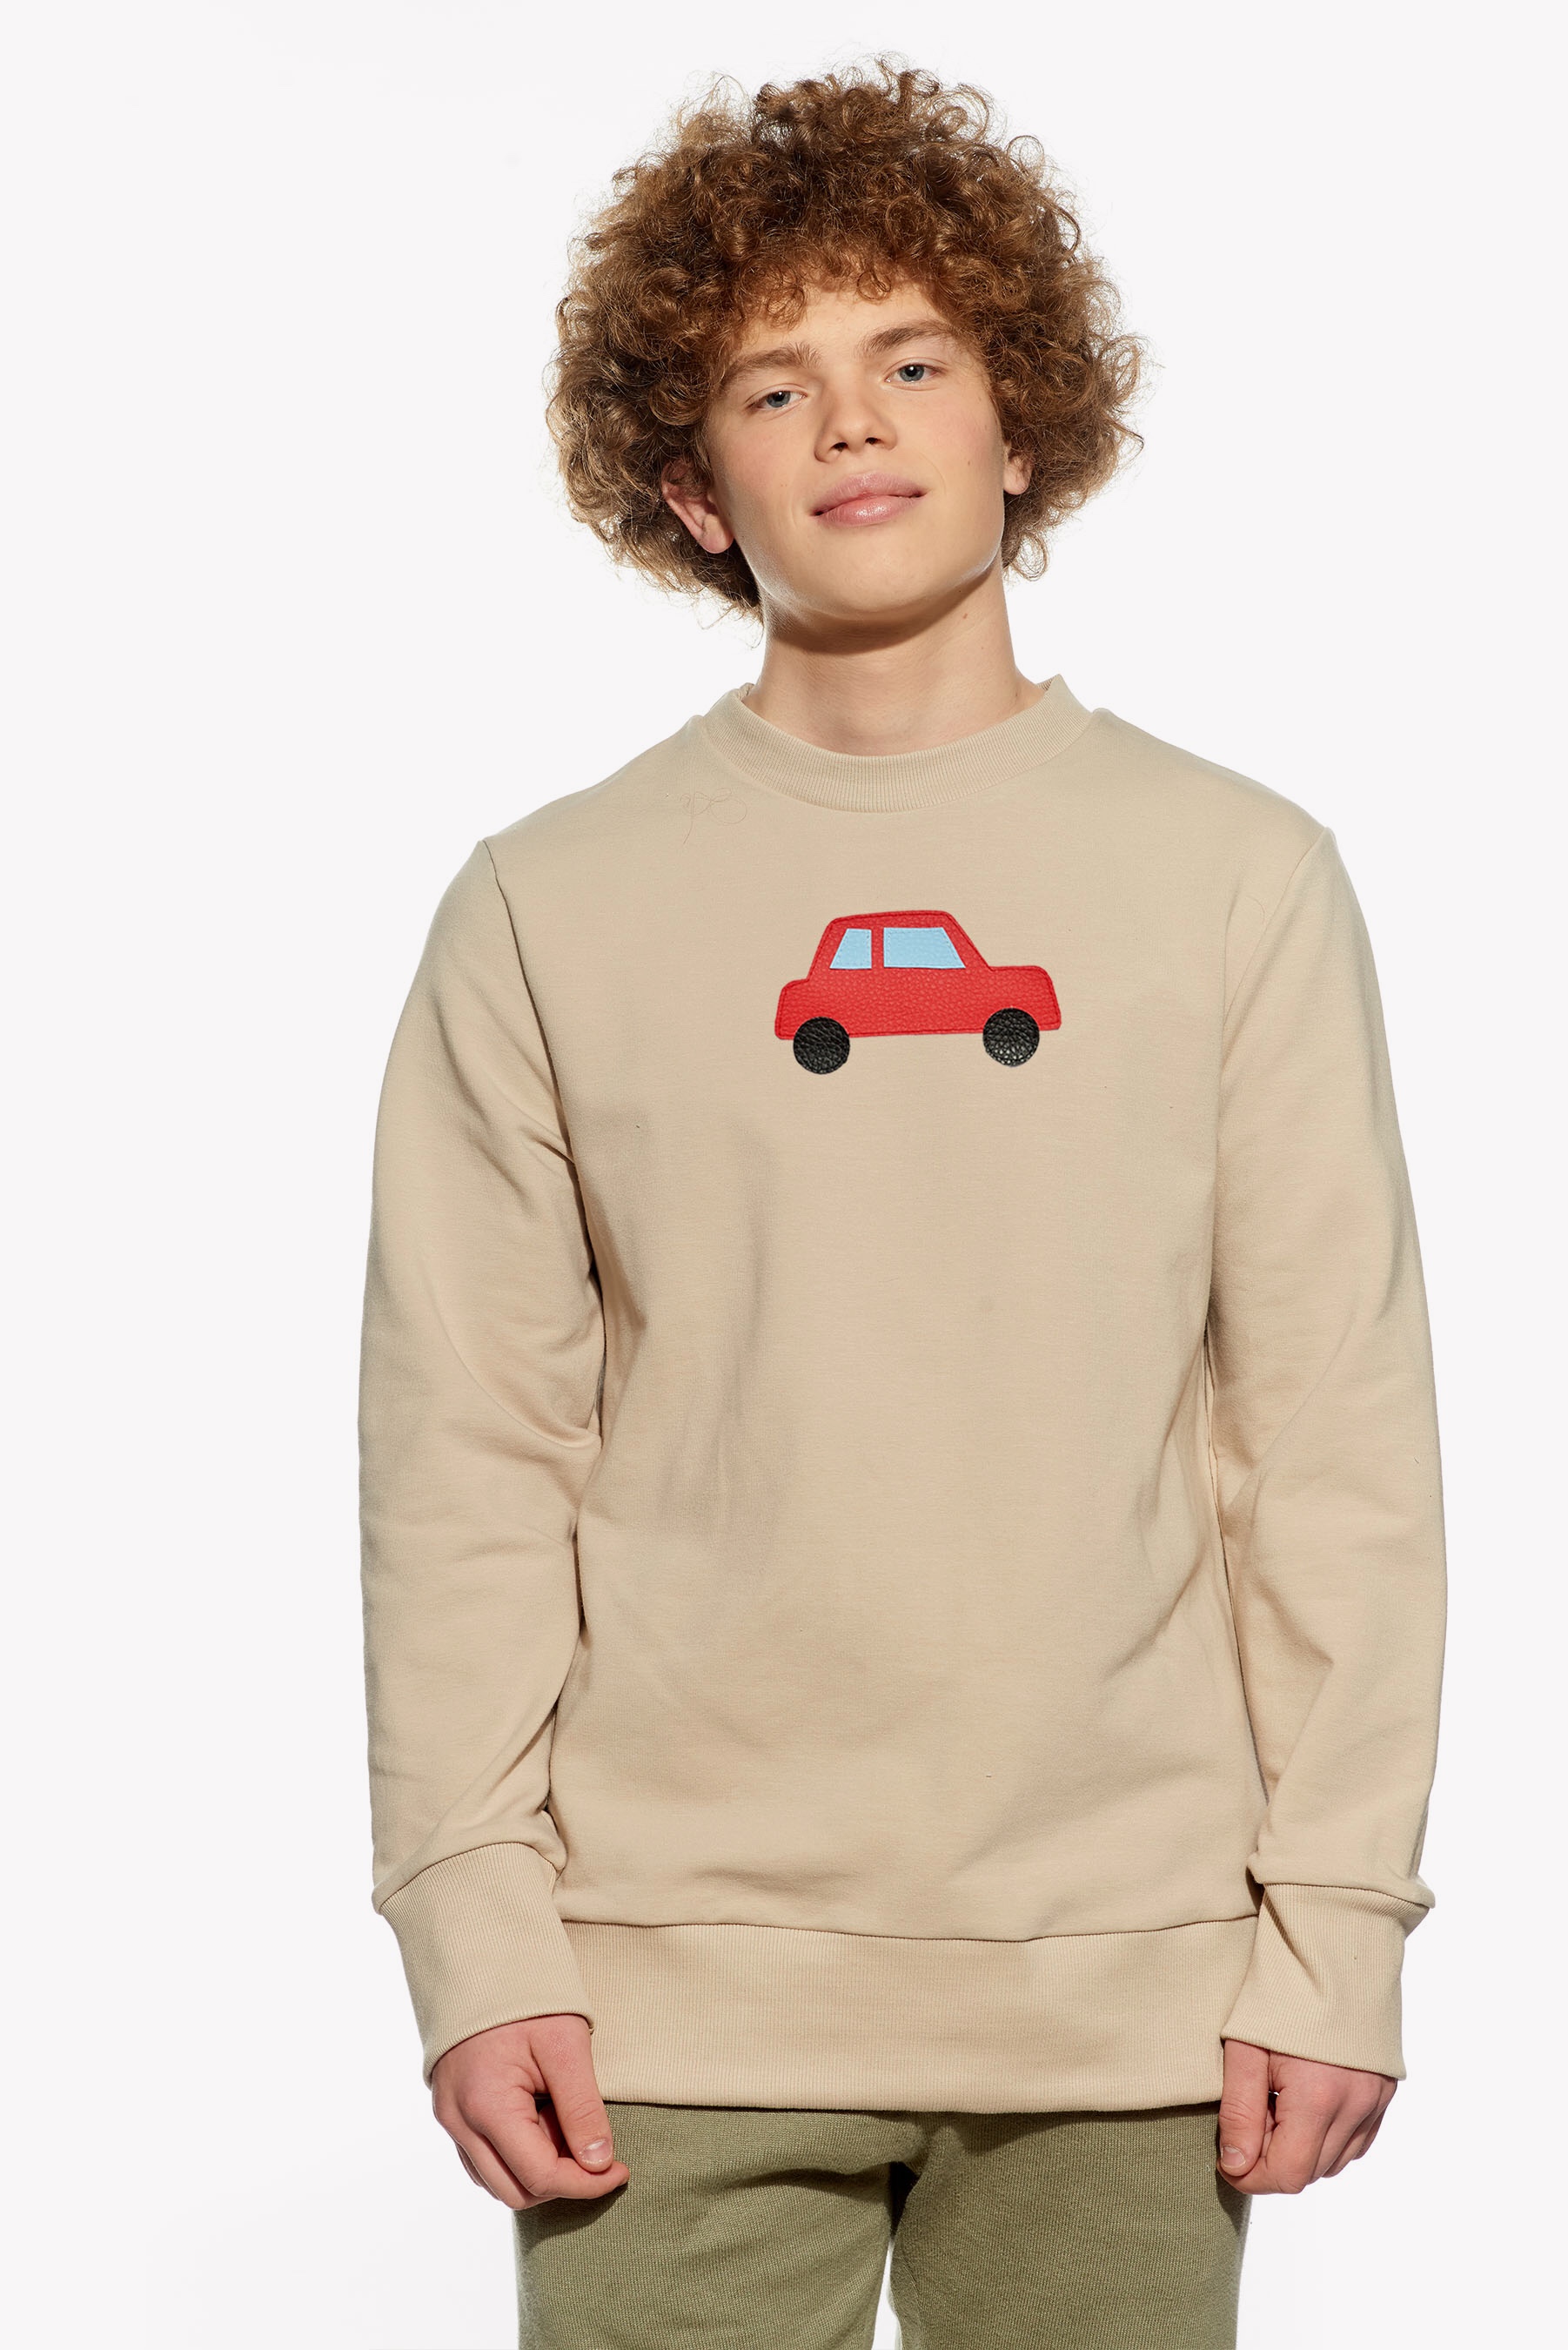 Hoodie with car